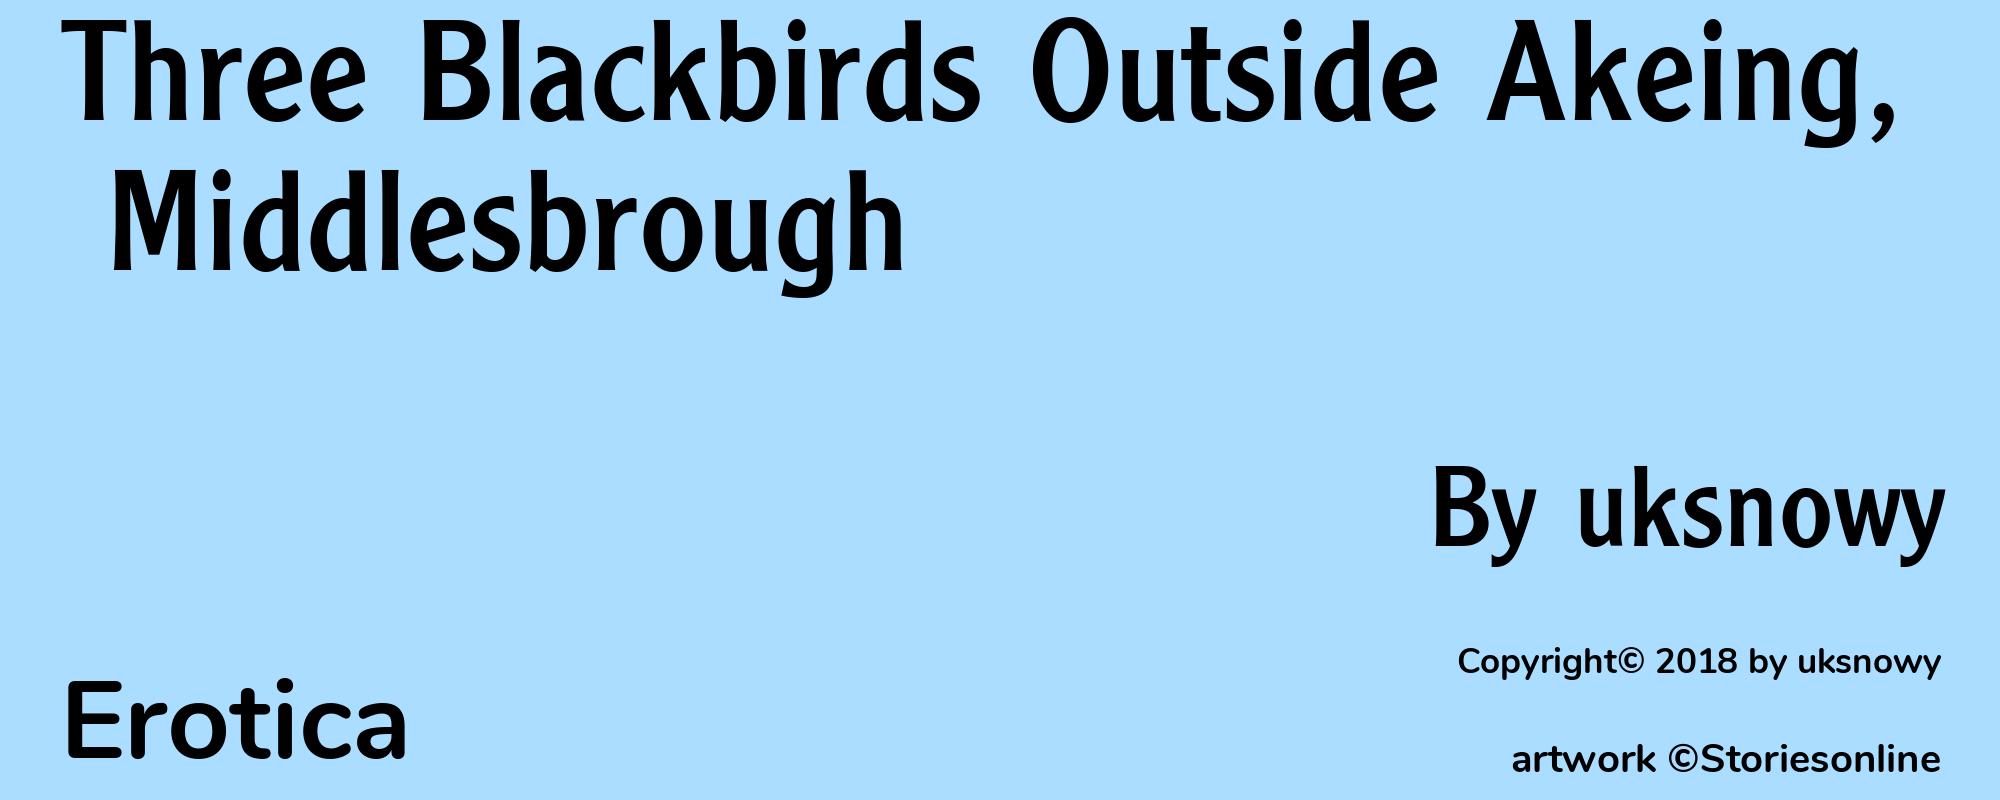 Three Blackbirds Outside Akeing, Middlesbrough - Cover